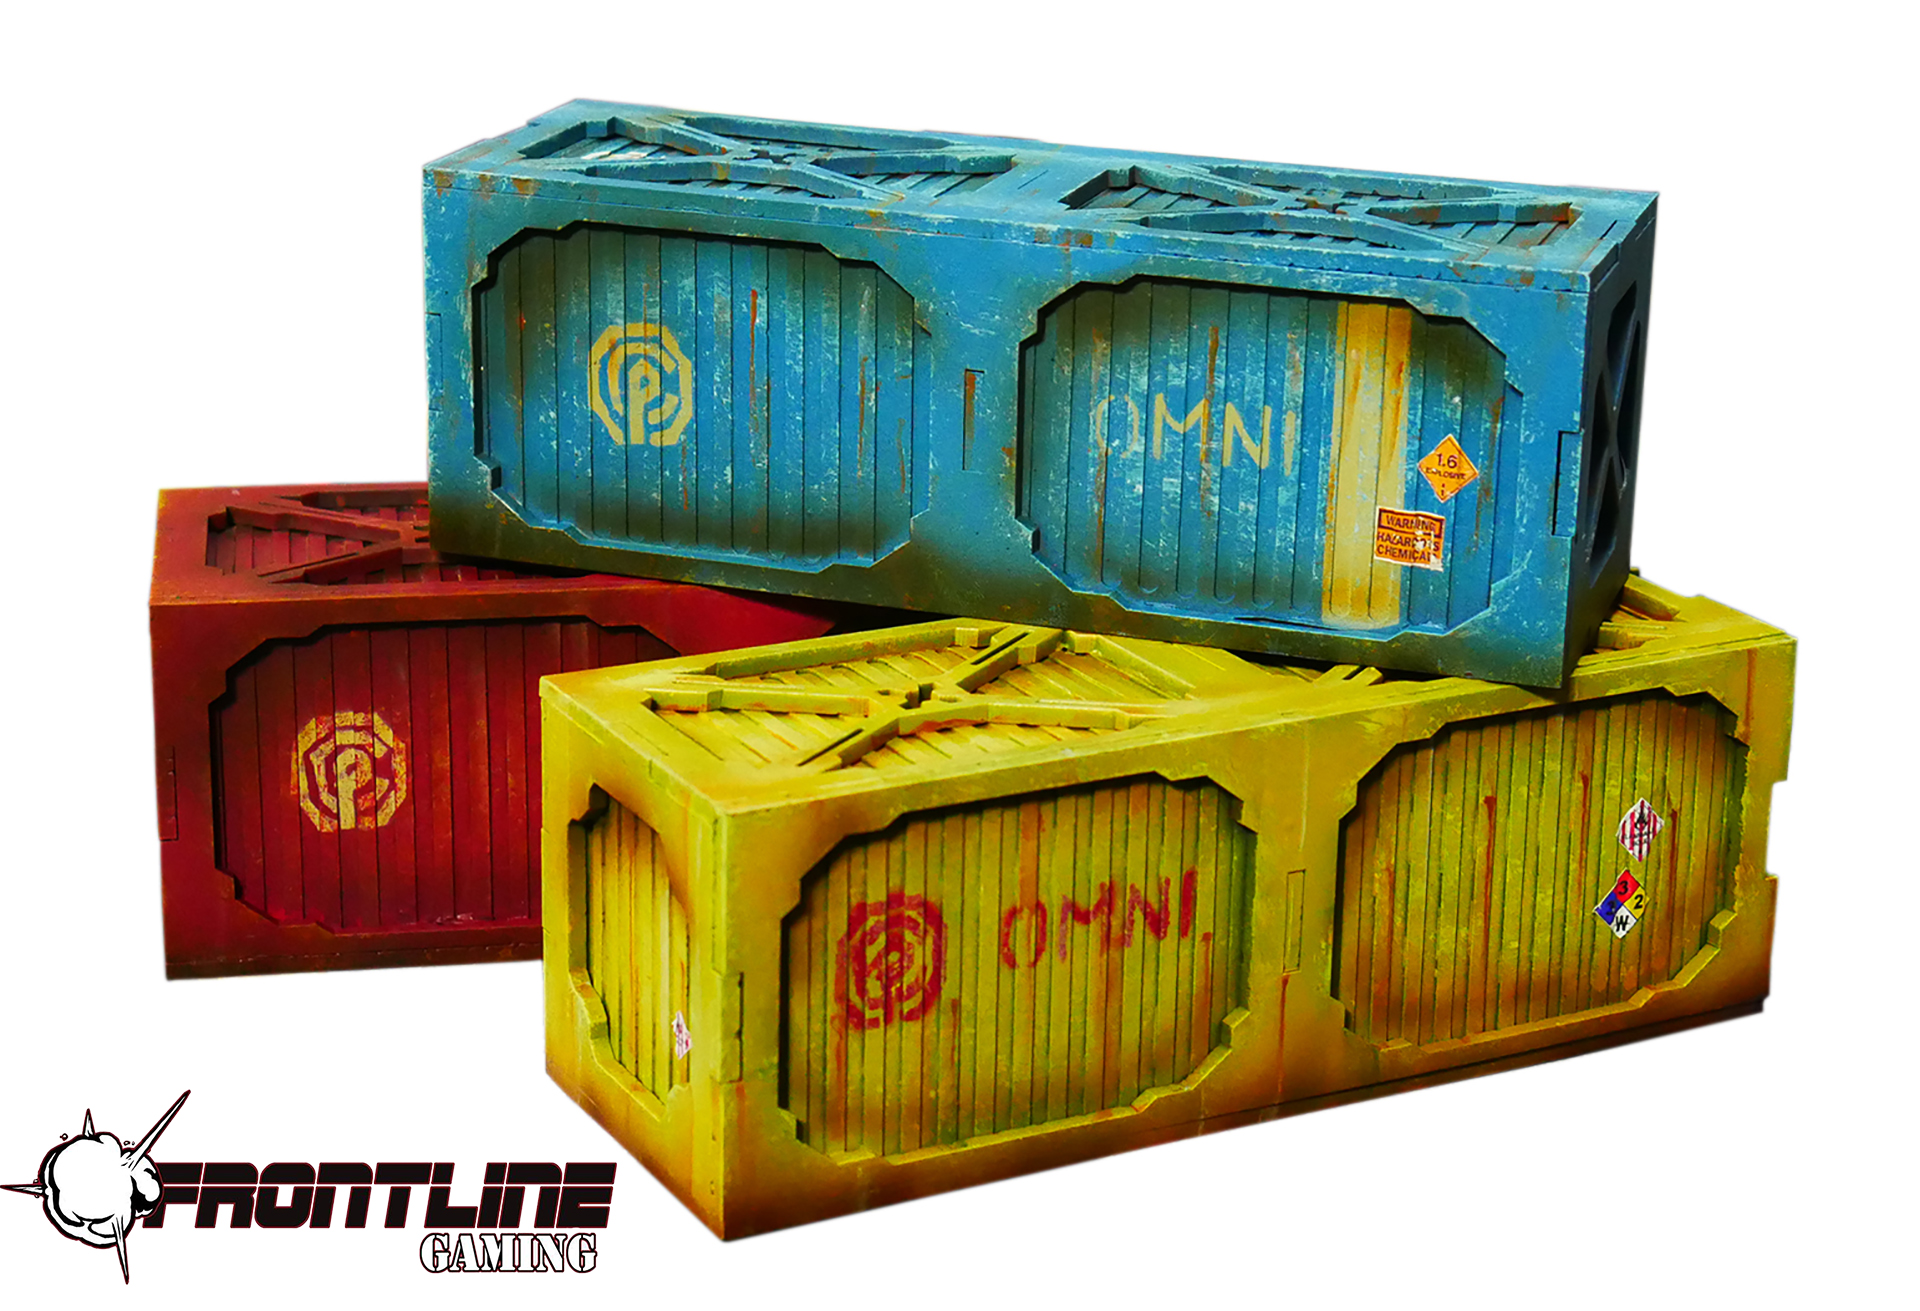 New ITC Terrain Series: Cargo Containers!